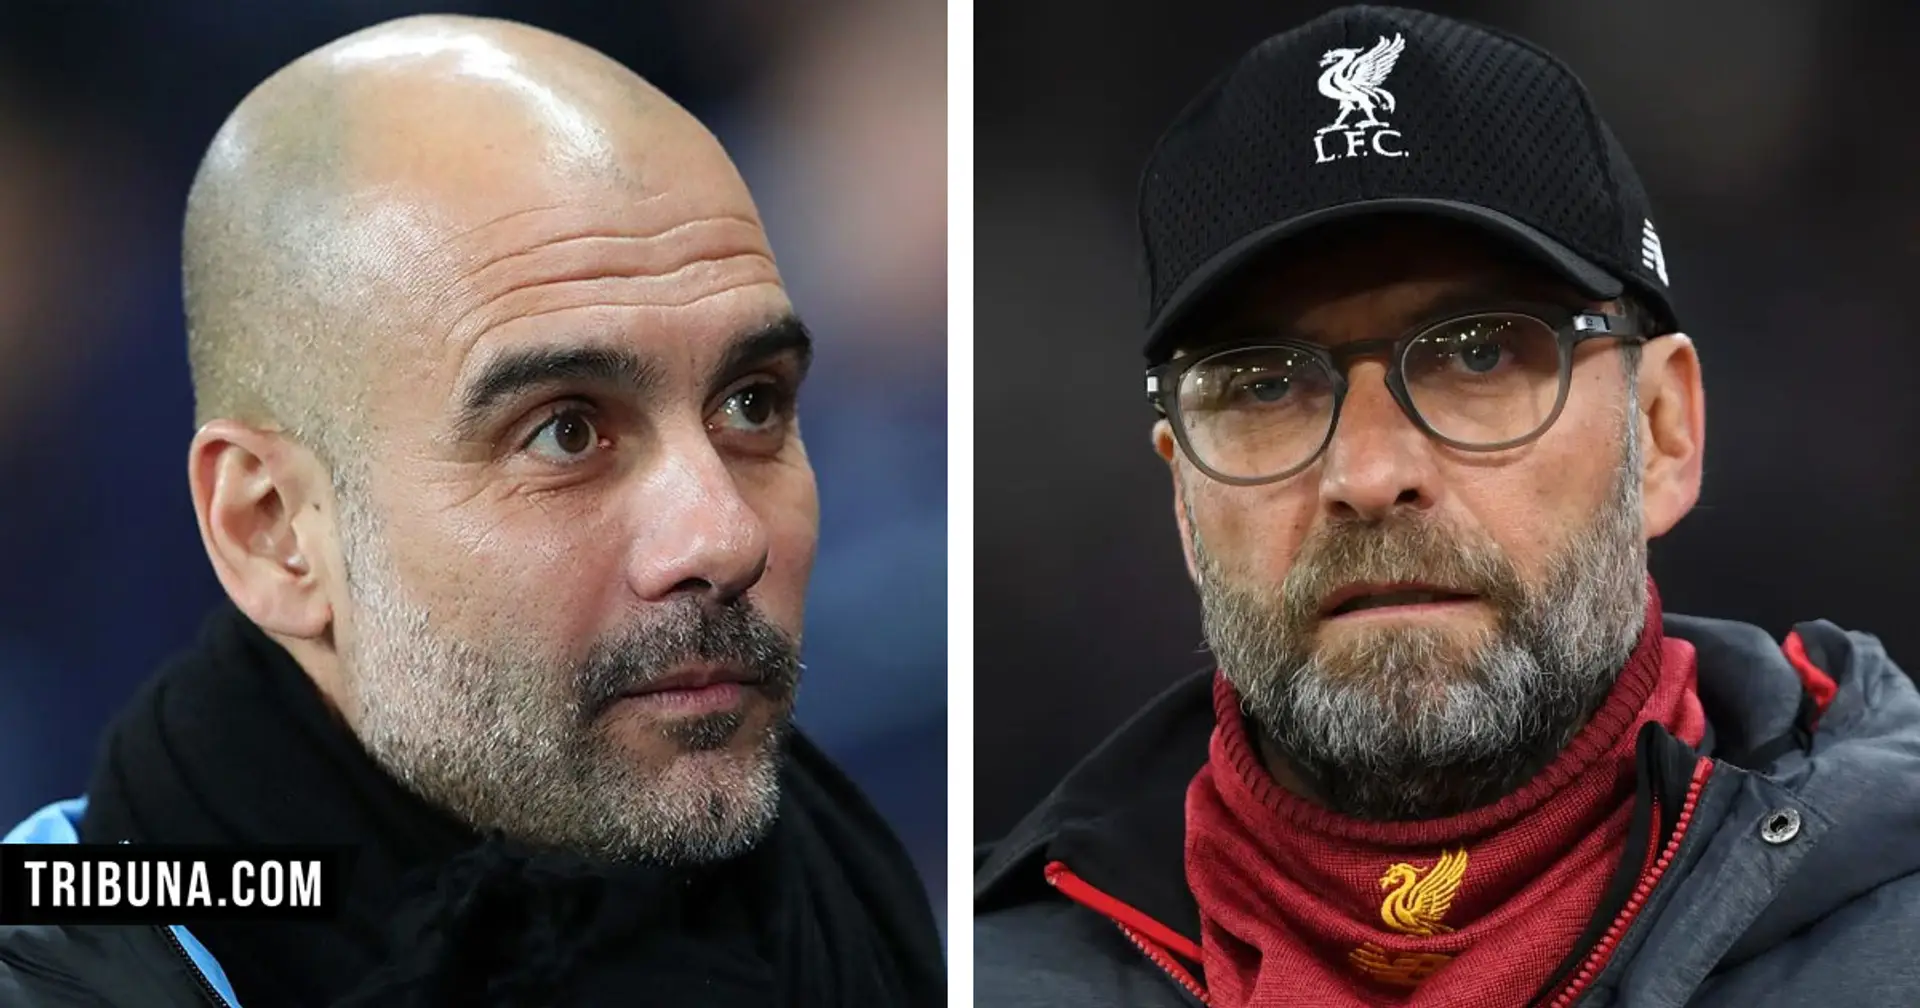 Klopp: 'I have no problem admitting that Pep Guardiola is the best manager of our era'